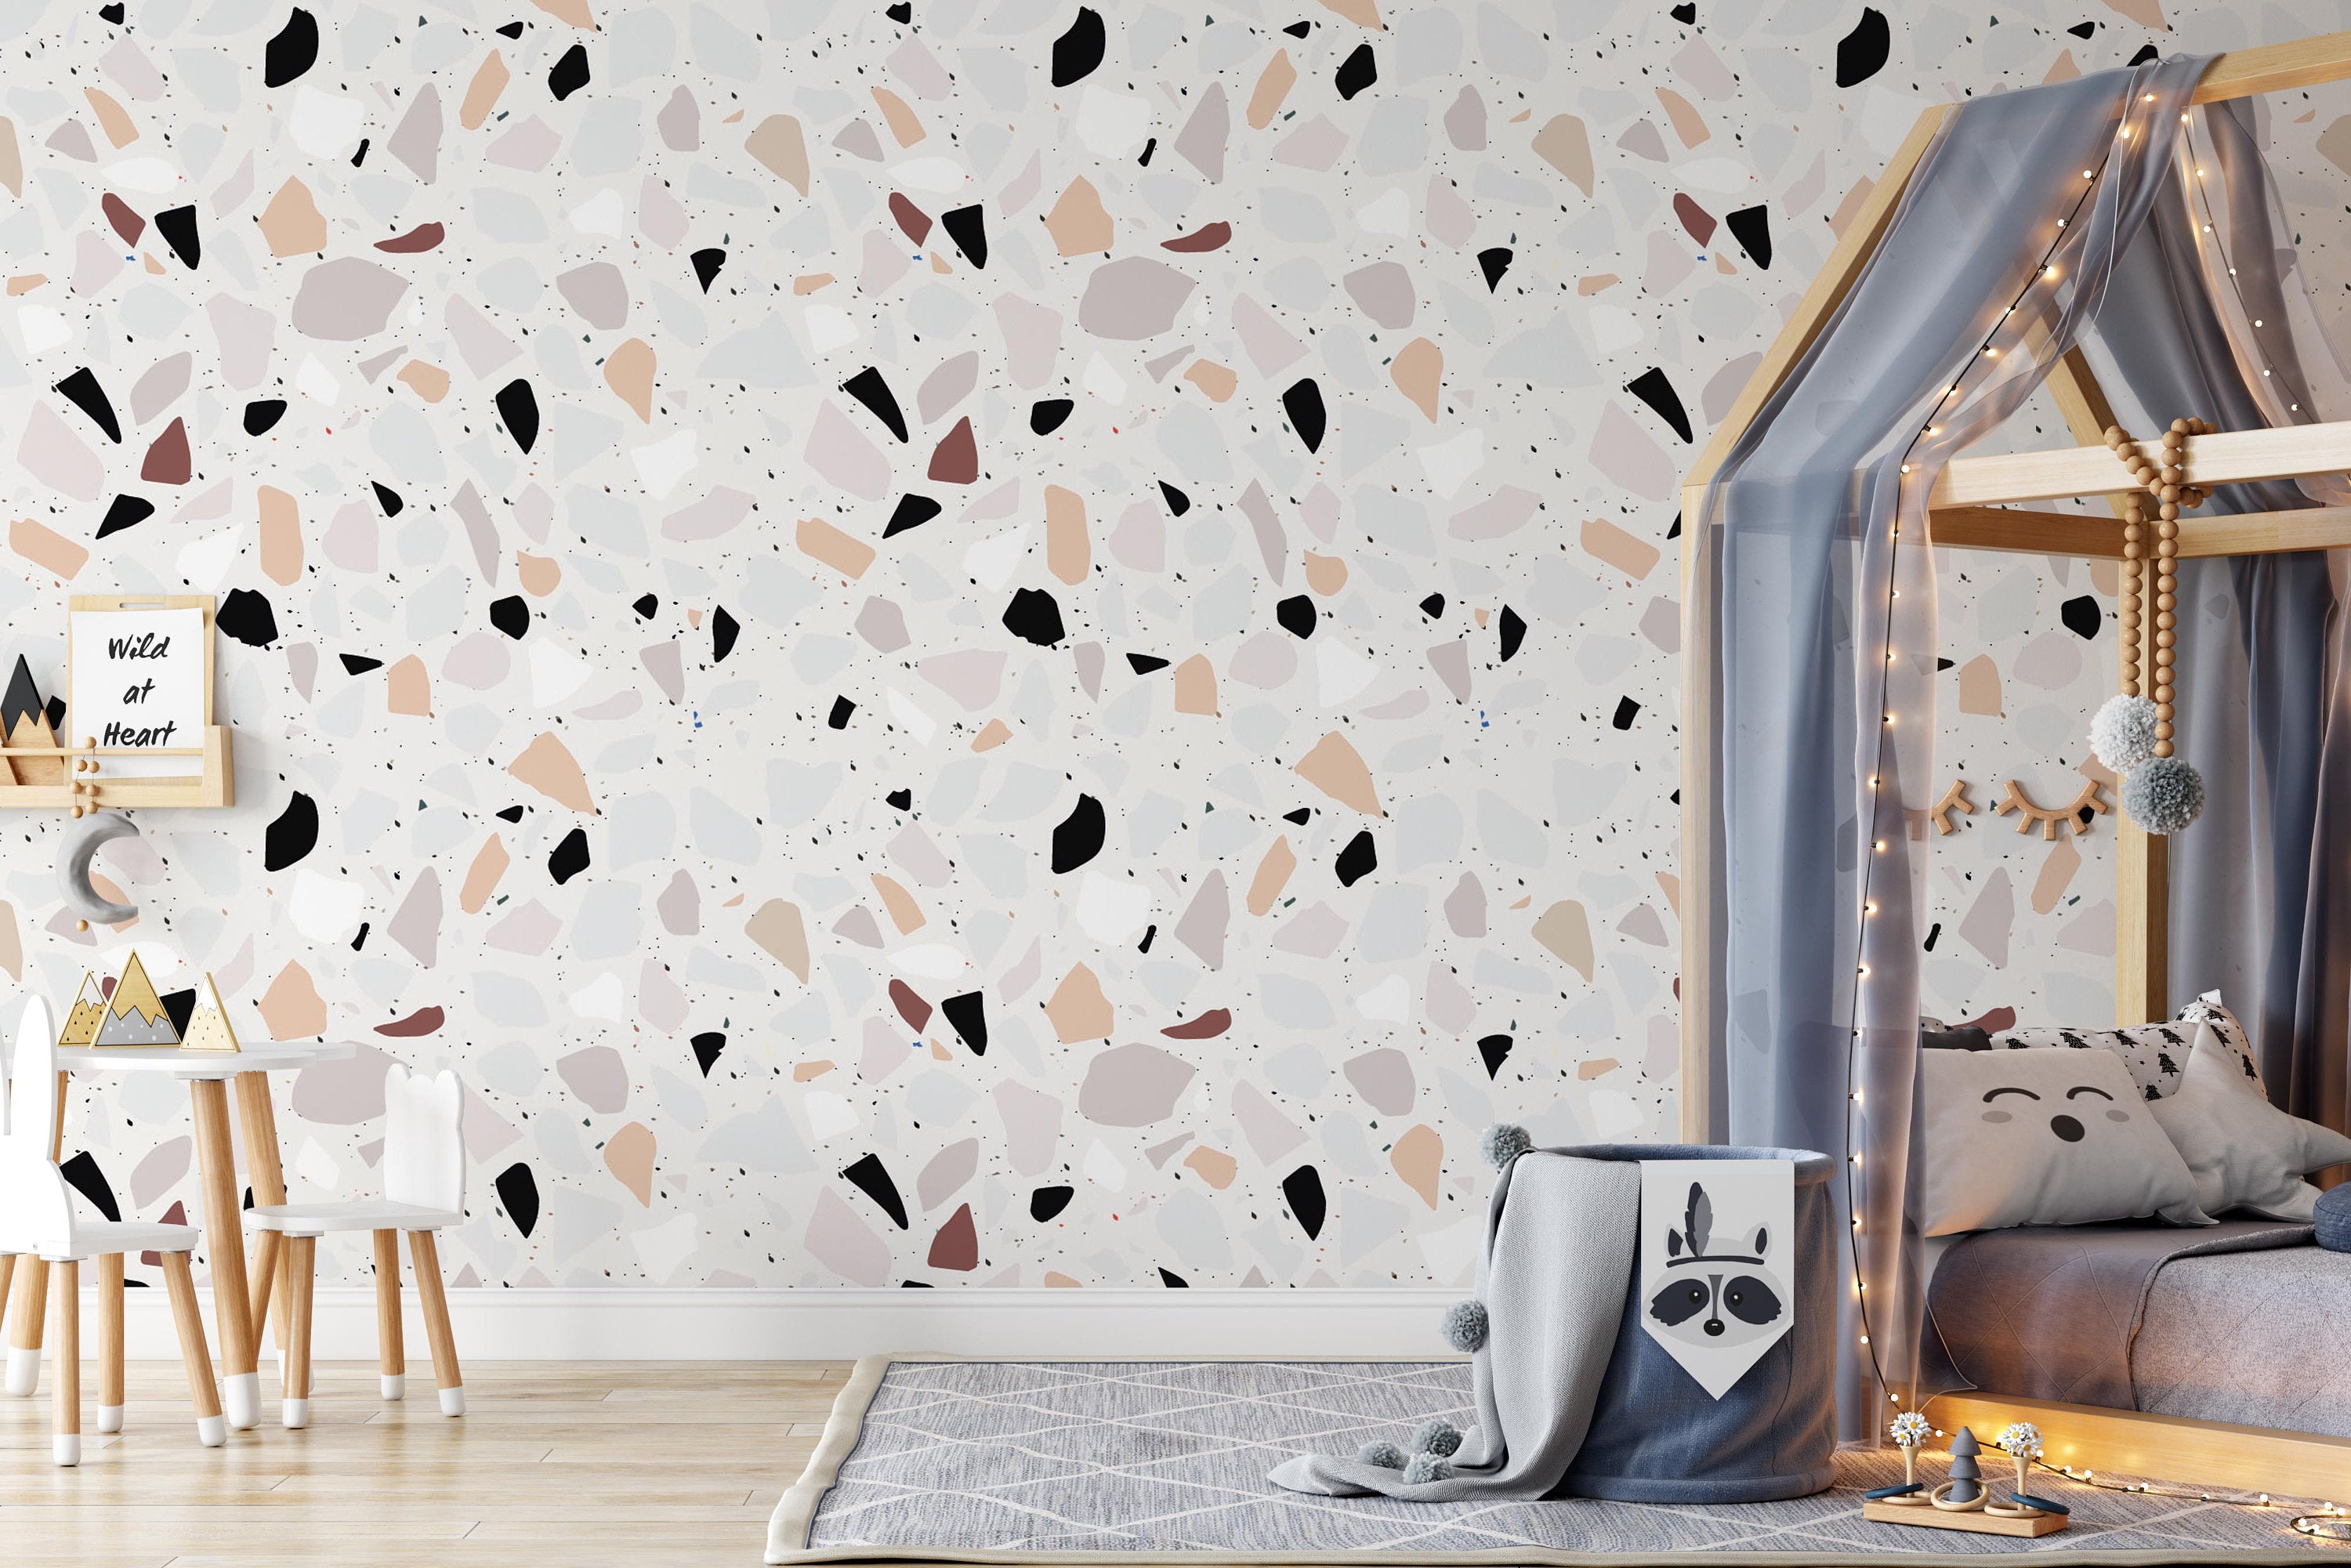 Abstract Venetian Terrazzo Imitation Pattern Stone Fragments Wallpaper Self Adhesive Peel and Stick Wall Sticker Wall Decoration Removable